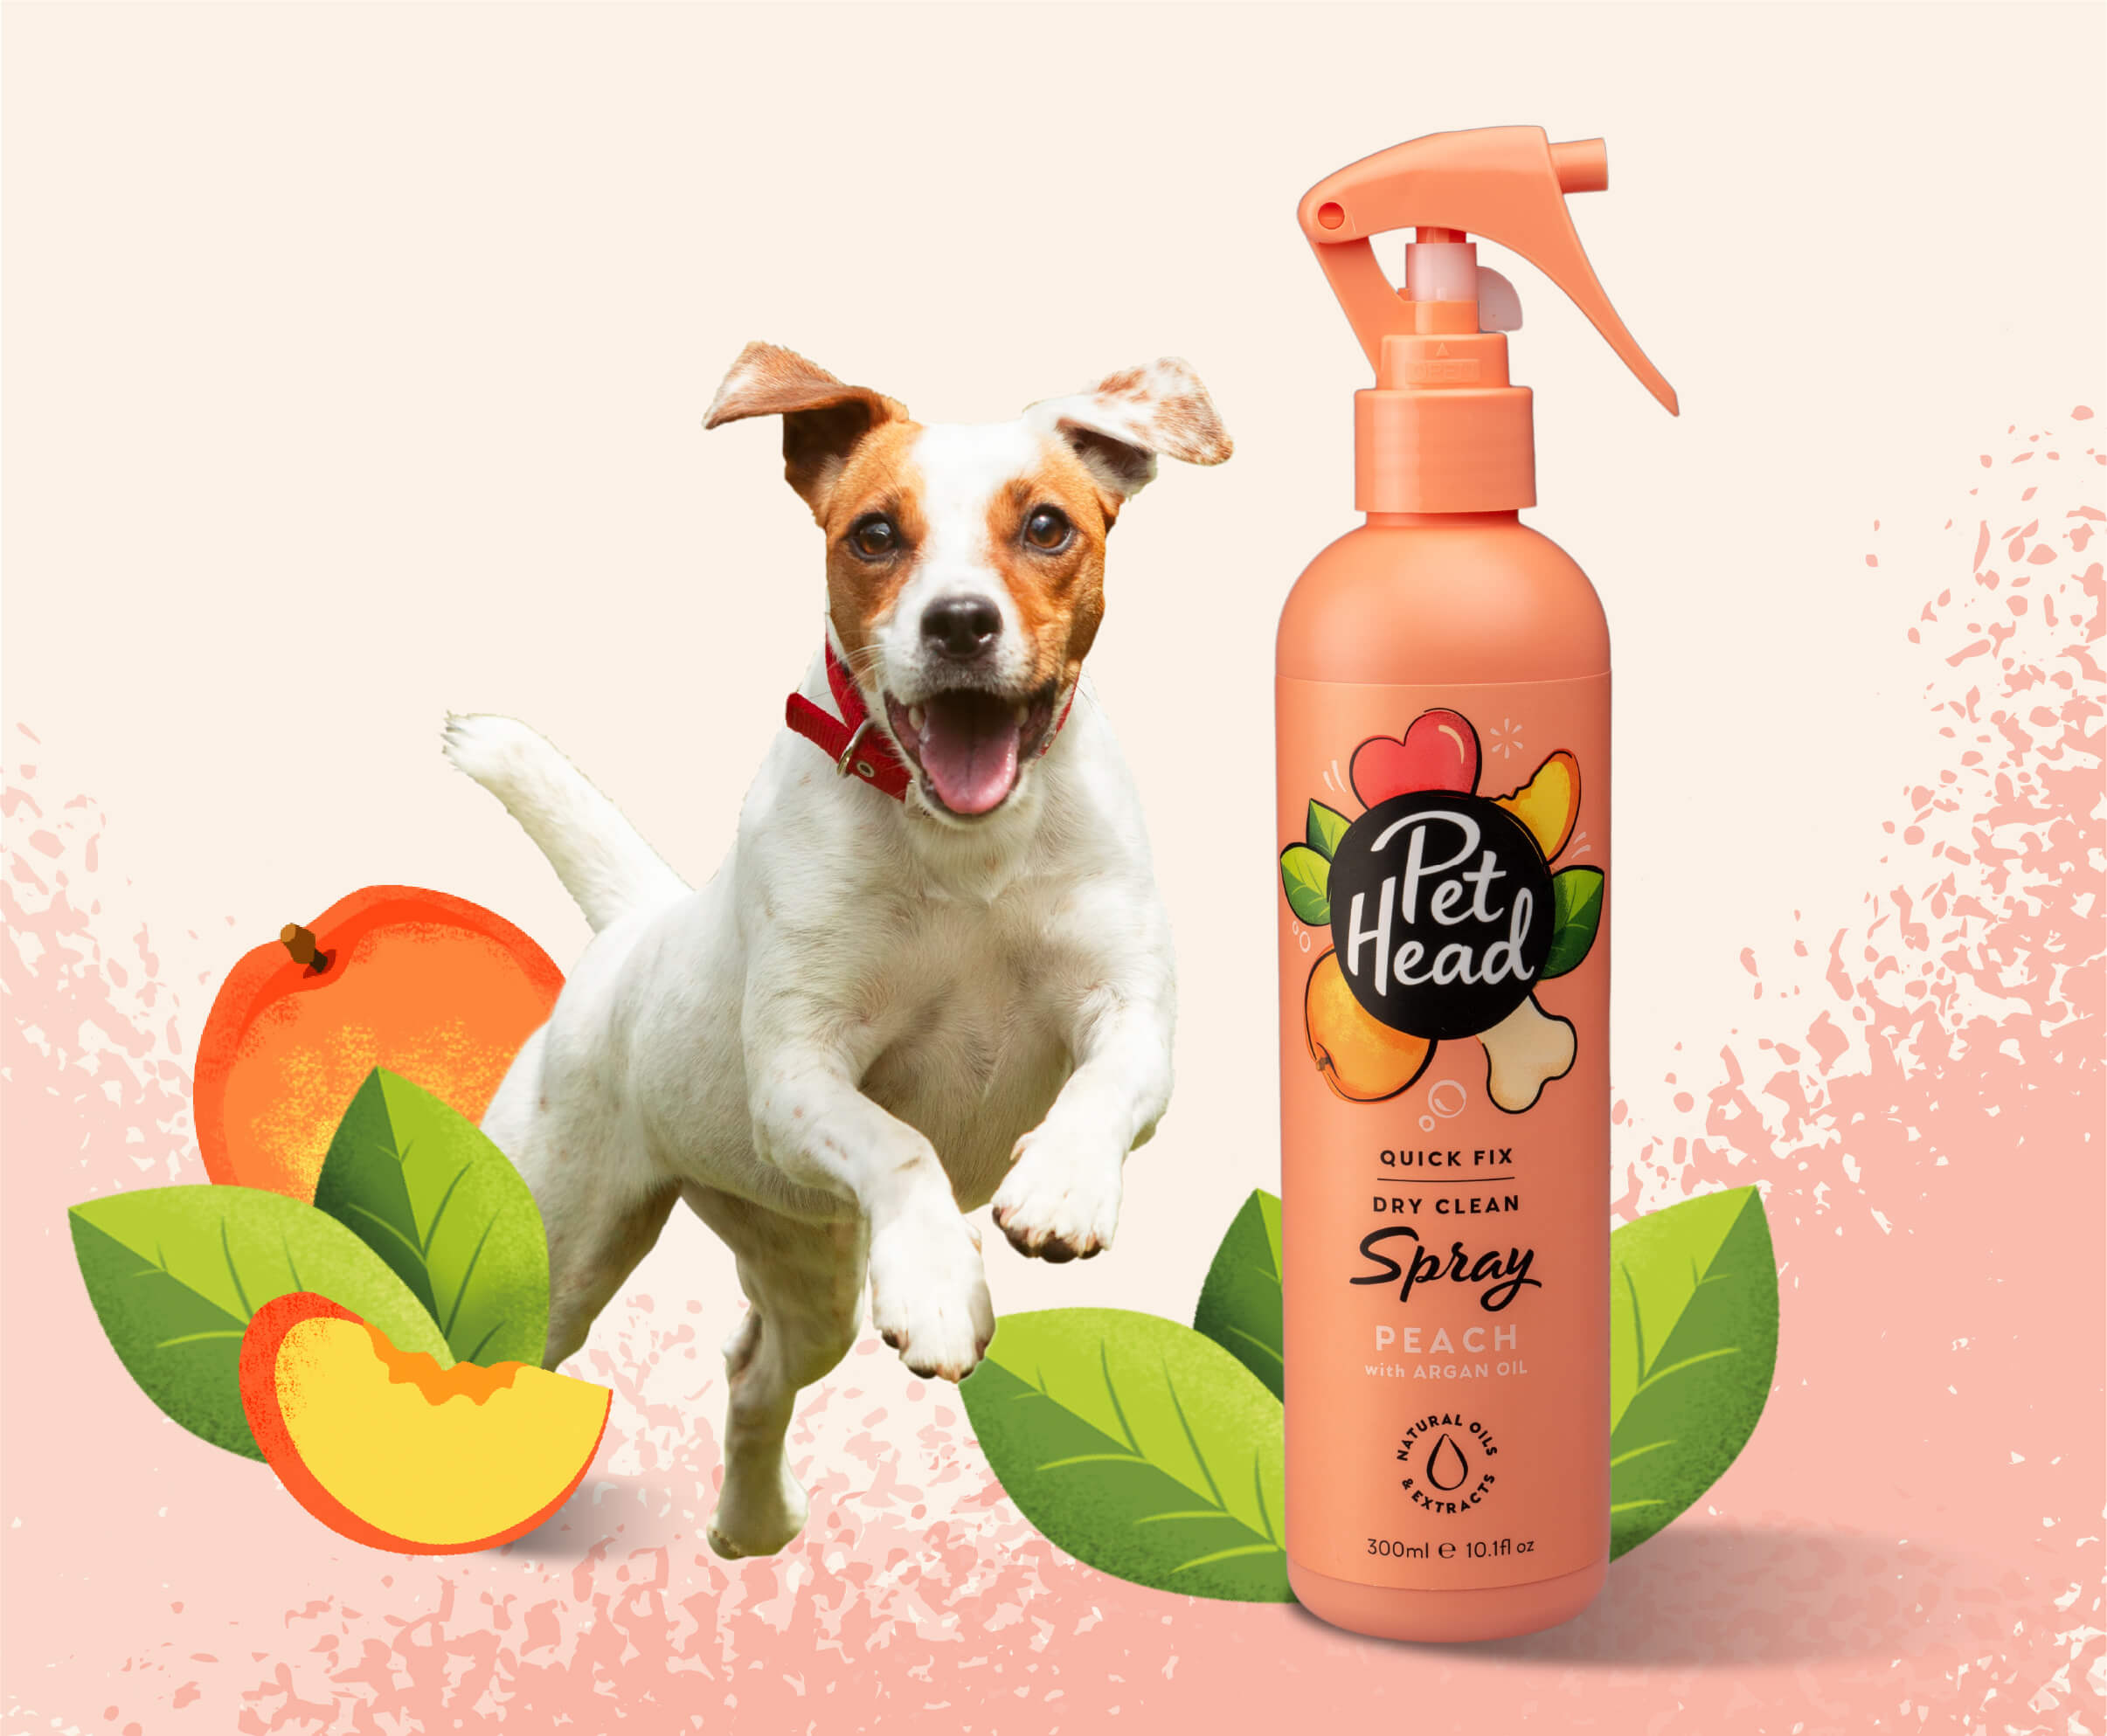 Product shot of the Pet Head Quick Fix Spray next to a happy dog